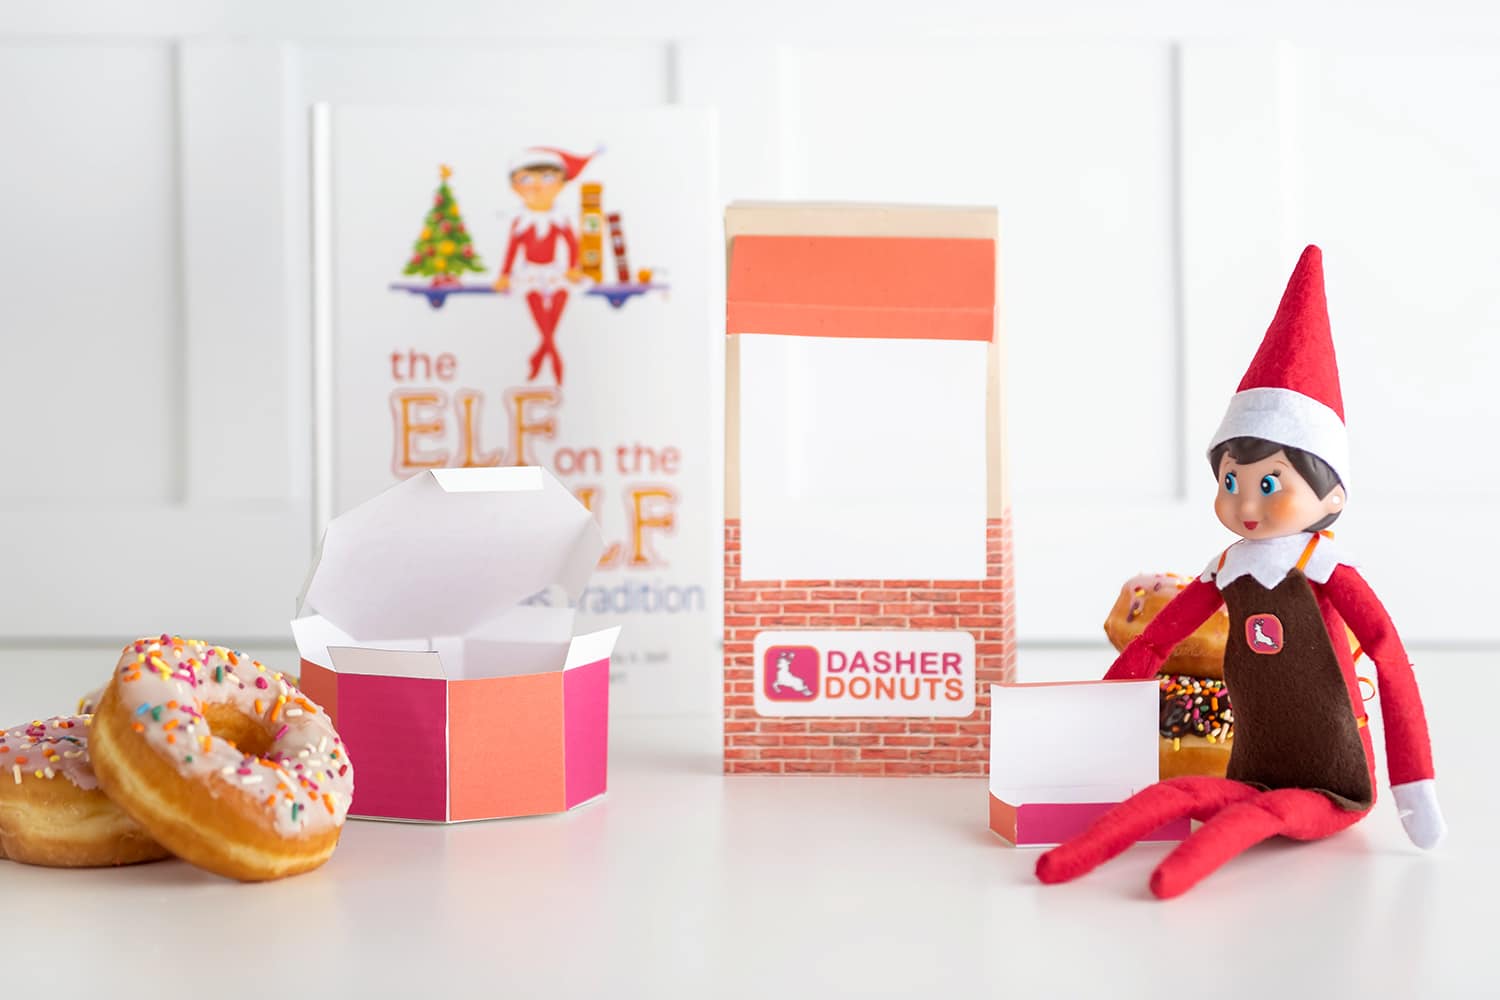 Elf on the Shelf with mini donuts, full sized donuts and box, and donut shop apron prop